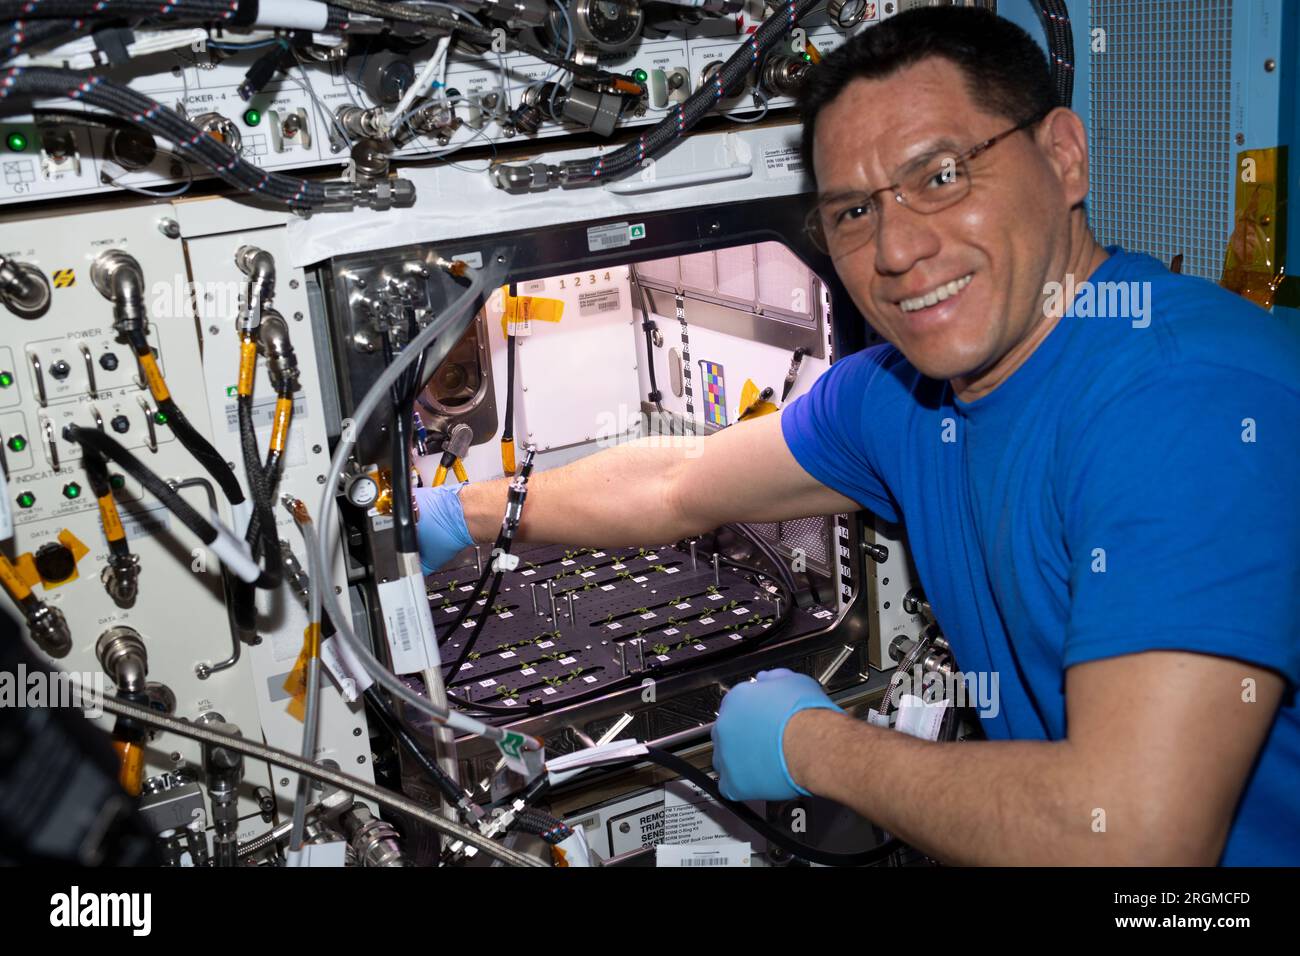 International Space Station, Earth Orbit. 25th July, 2023. International Space Station, Earth Orbit. 25 July, 2023. NASA astronaut and Expedition 68 Flight Engineer Frank Rubio works thinning thale cress seedlings in the Plant Habitat aboard the International Space Station, July 25, 2023 in Earth Orbit. Rubio is thinning the sprouts to retain a singular healthy plant per unit as the crew continues ongoing investigations of assessing whether adaptations in one generation of plants grown in space can transfer to the next. Credit: NASA/NASA/Alamy Live News Stock Photo